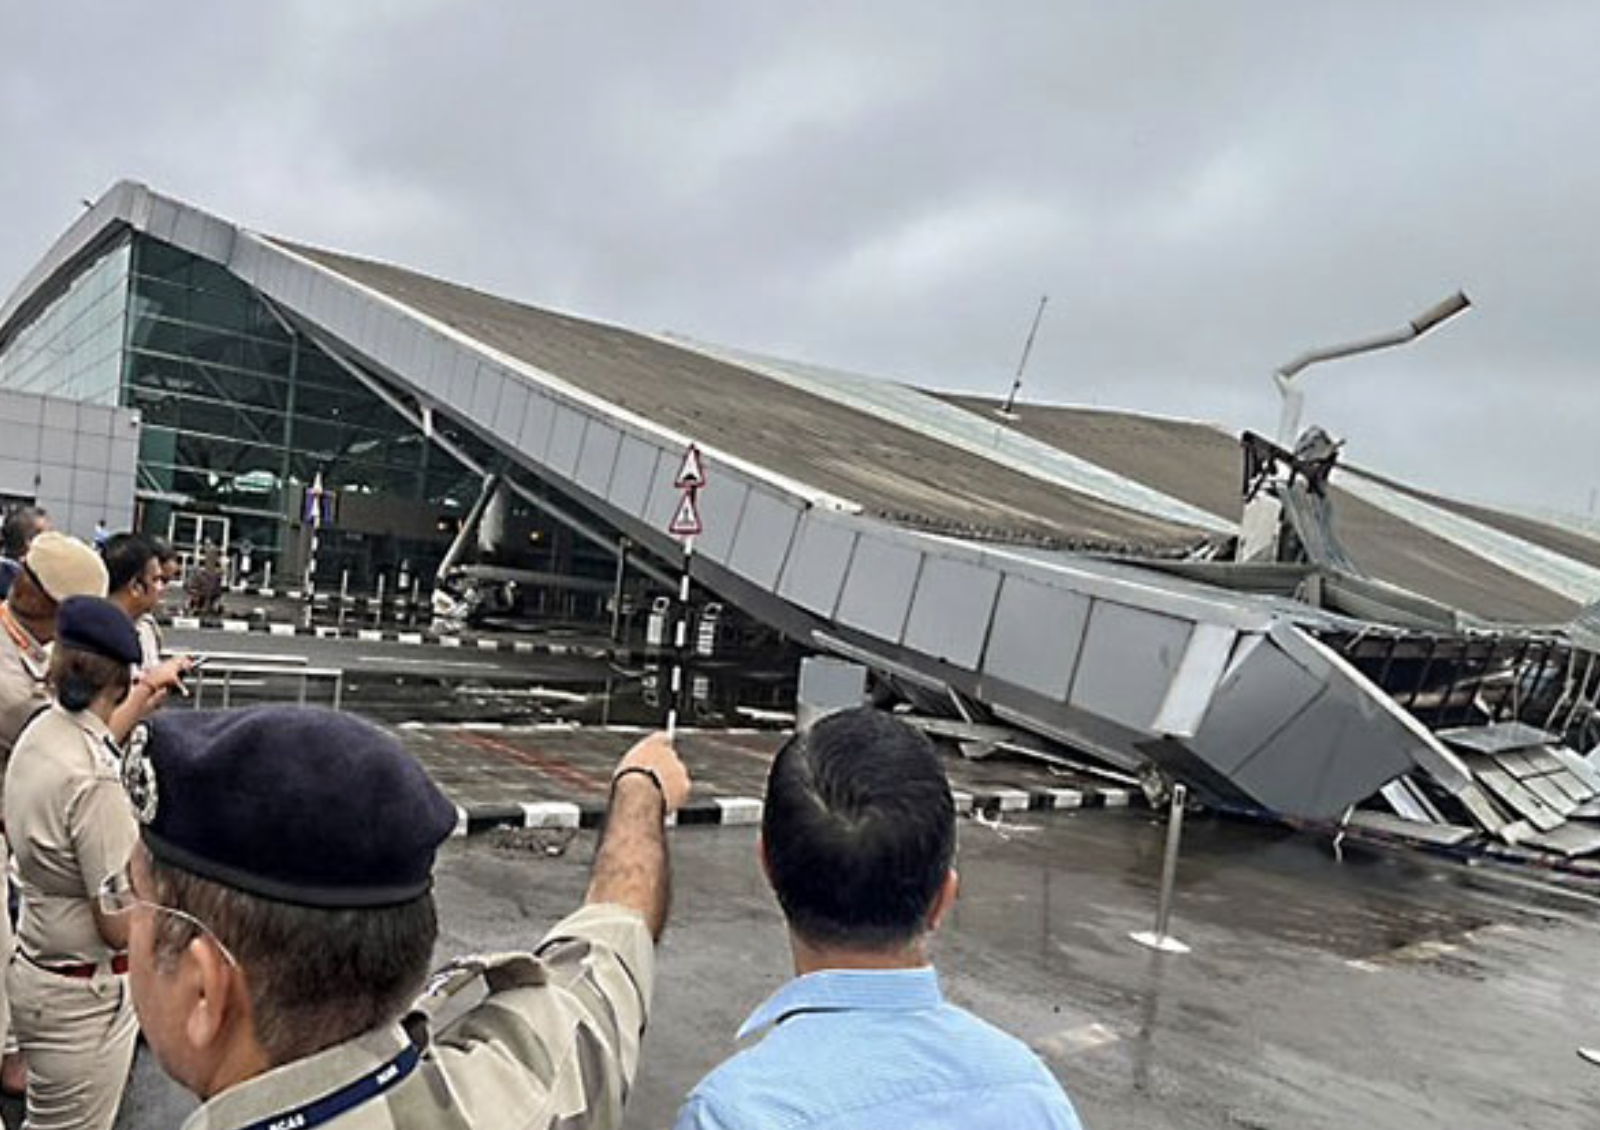 dial-forms-technical-committee-to-probe-cause-of-canopy-collapse-at-delhi-airports-t1-